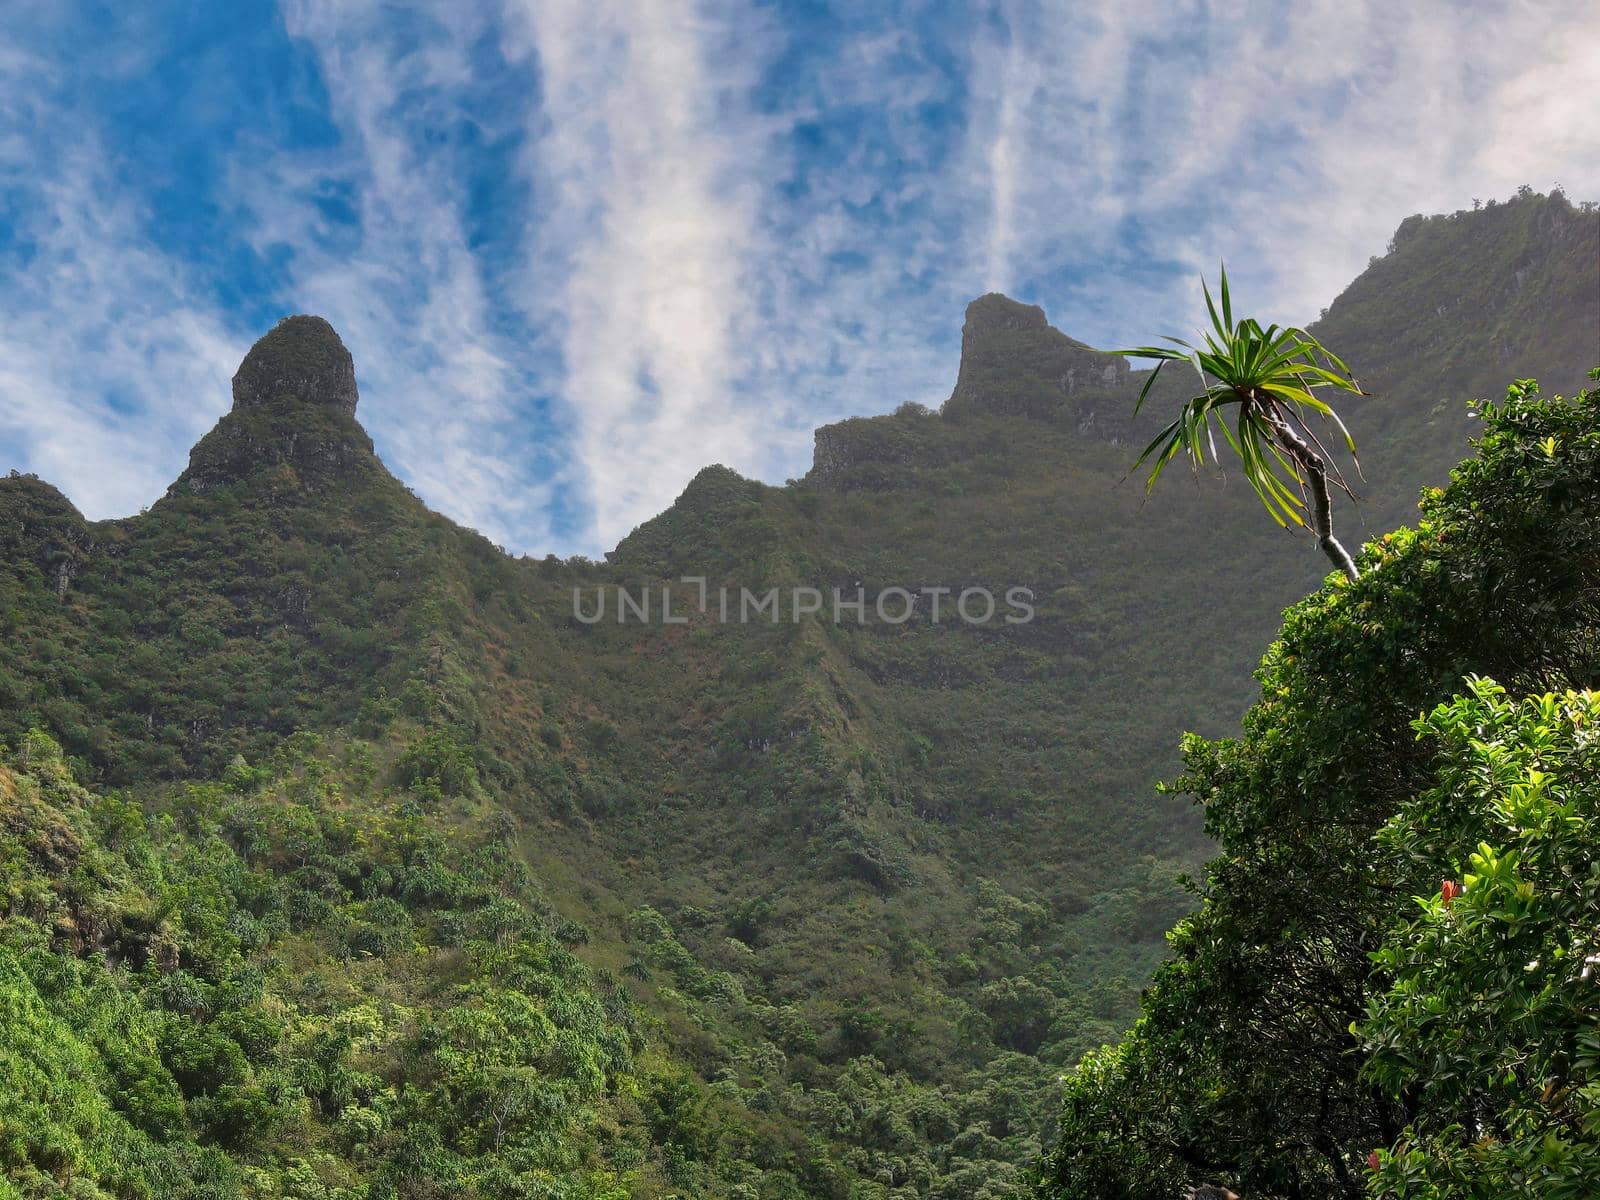 View of Single Palm Tree Clinging to Towering Sea Cliffs, or Pali, Along the Kalalau Trail on the Na Pali Coast State Wilderness Park in Kapa'a on the Island of Kauai in Hawaii.